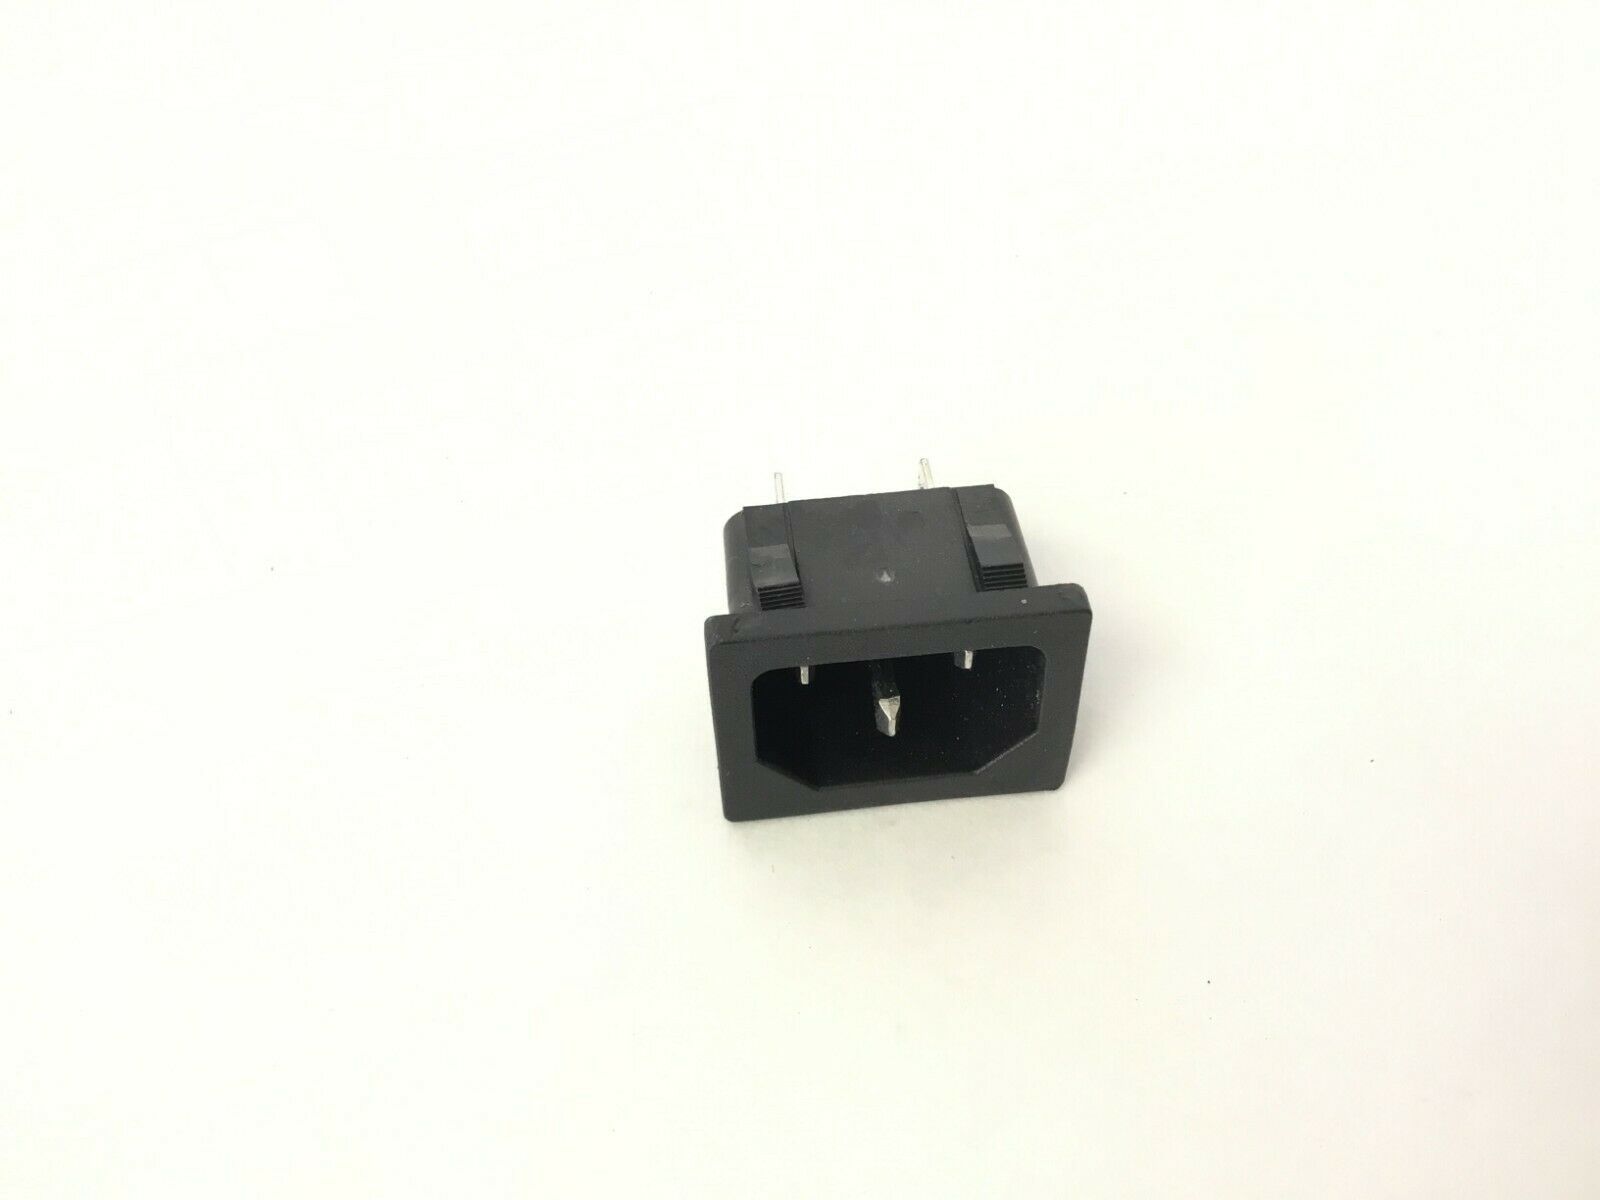 LifeSpan TR3000i Treadmill Power Socket Inlet Entry Plug In 407202250150001 (Used)